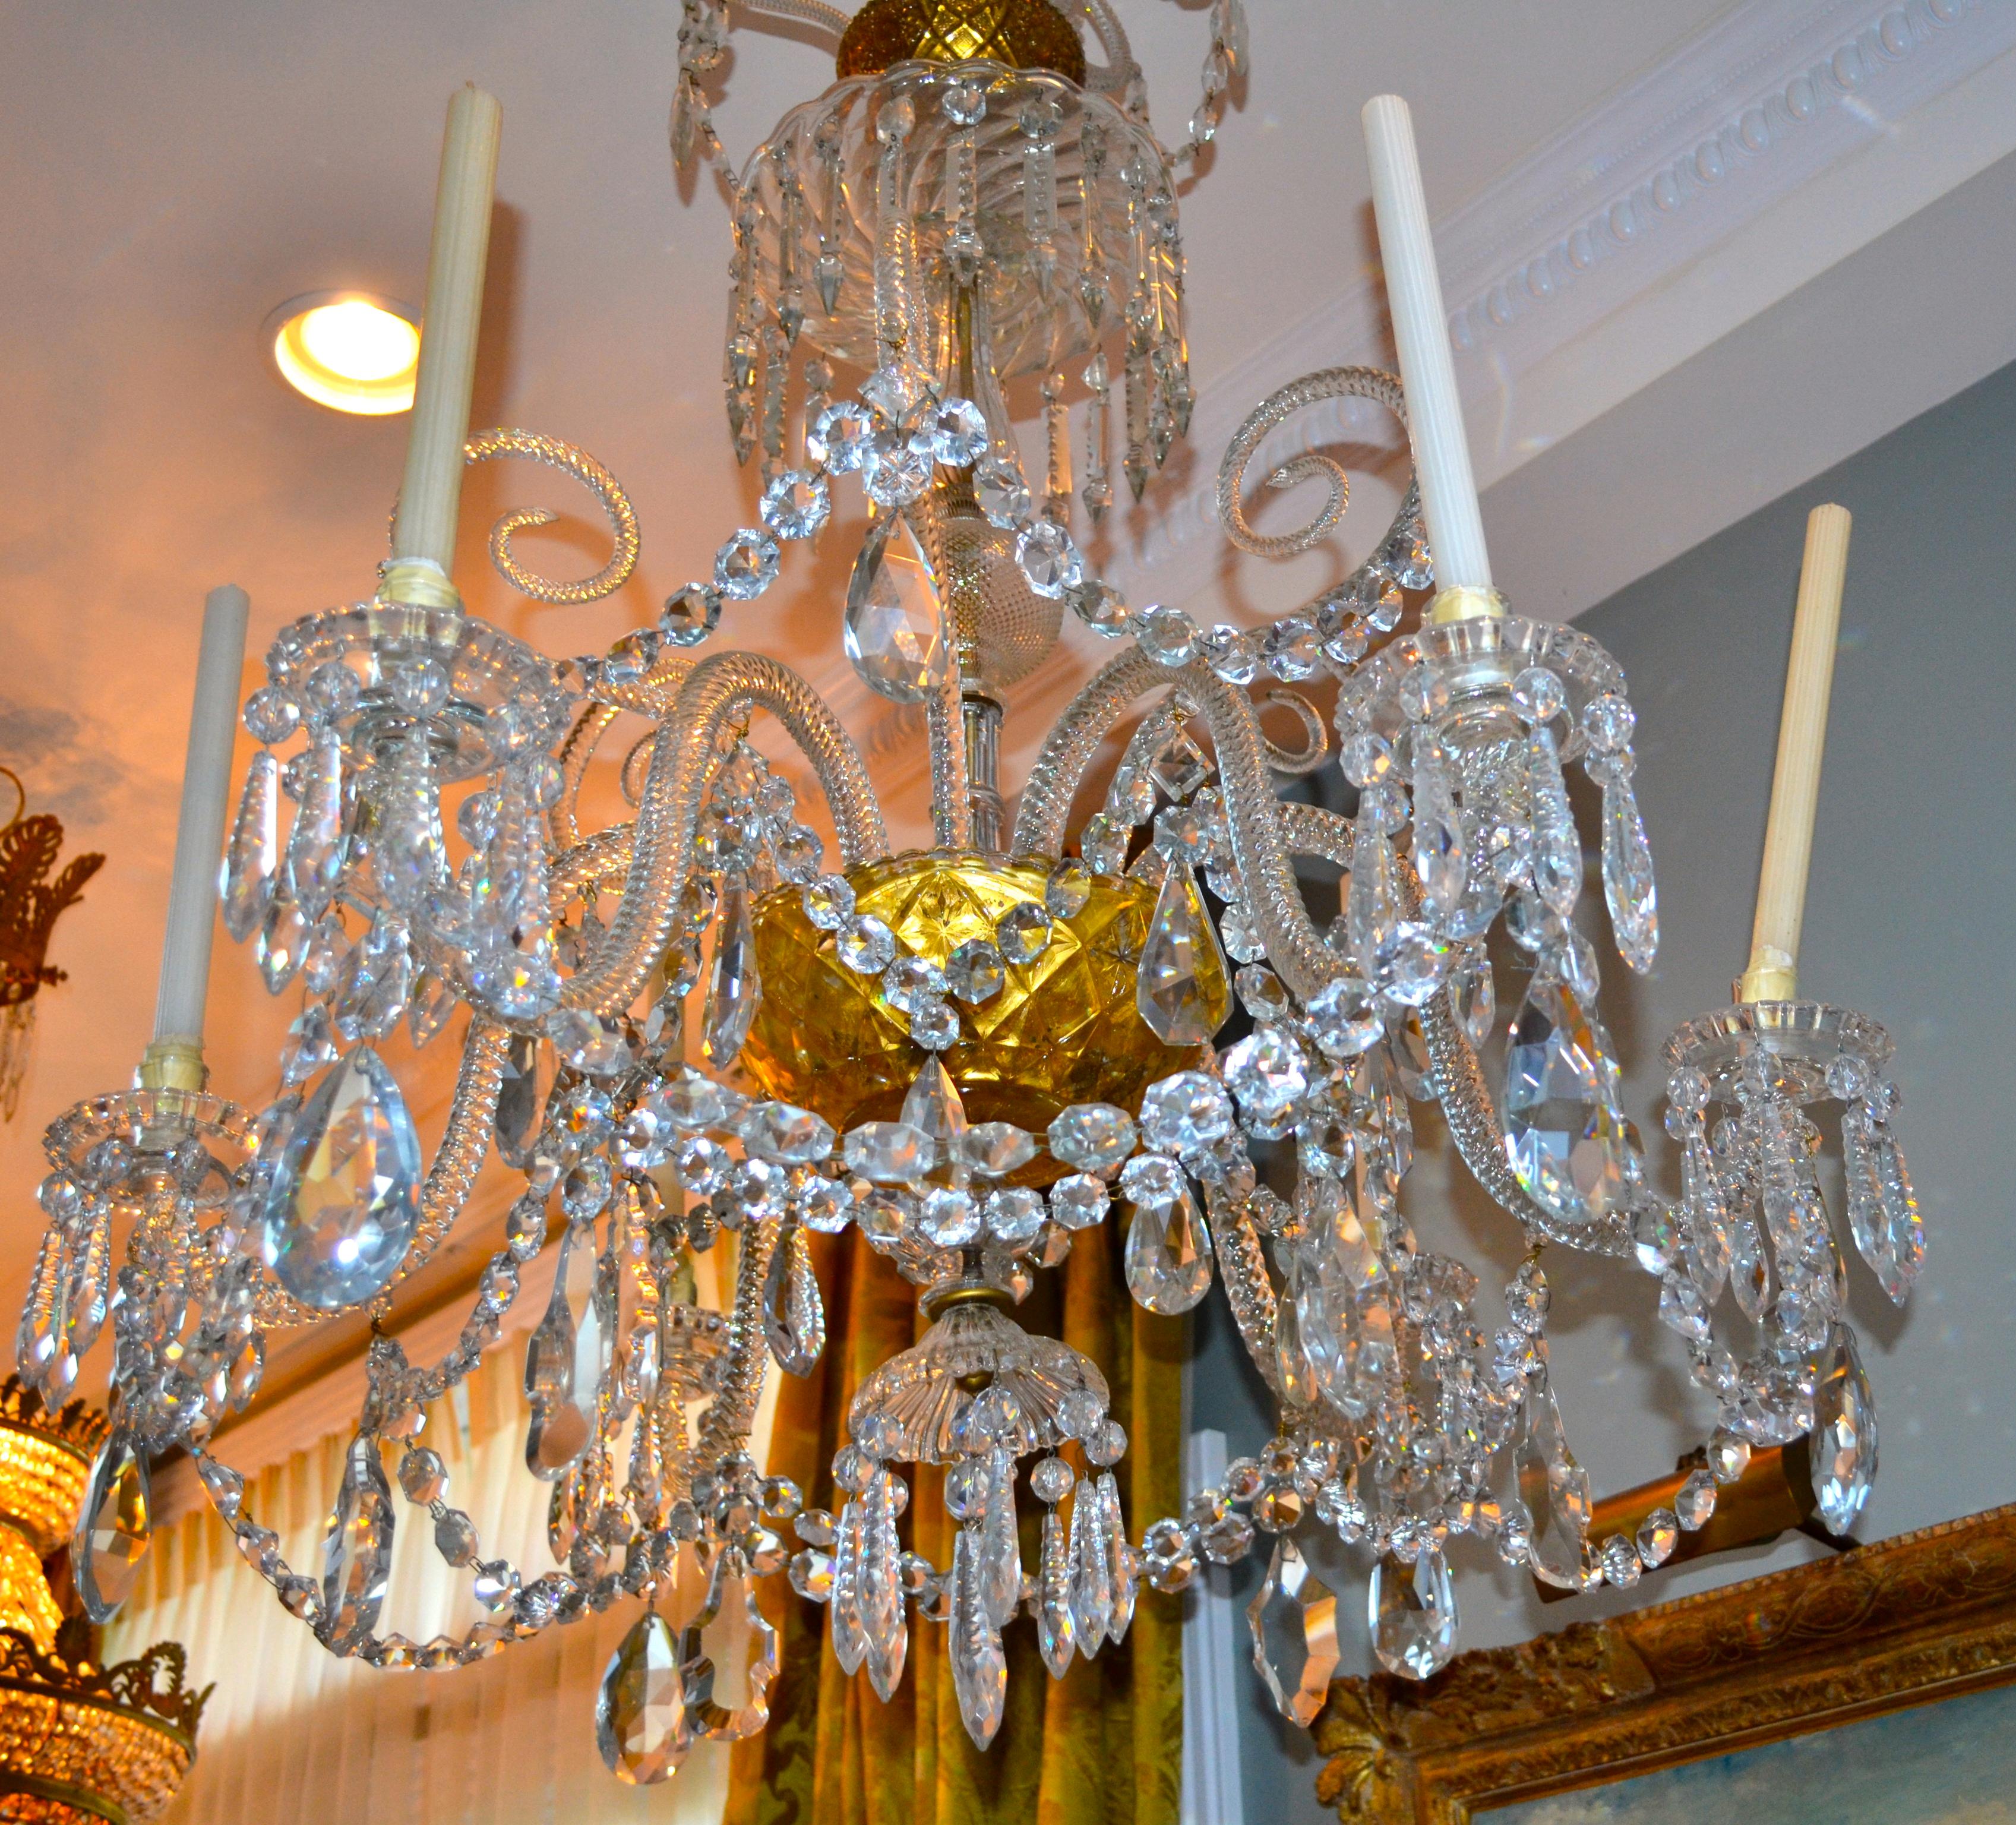 Rare Original 19 Century Six-Arm Cut Crystal Baccarat Chandelier In Good Condition For Sale In Vancouver, British Columbia